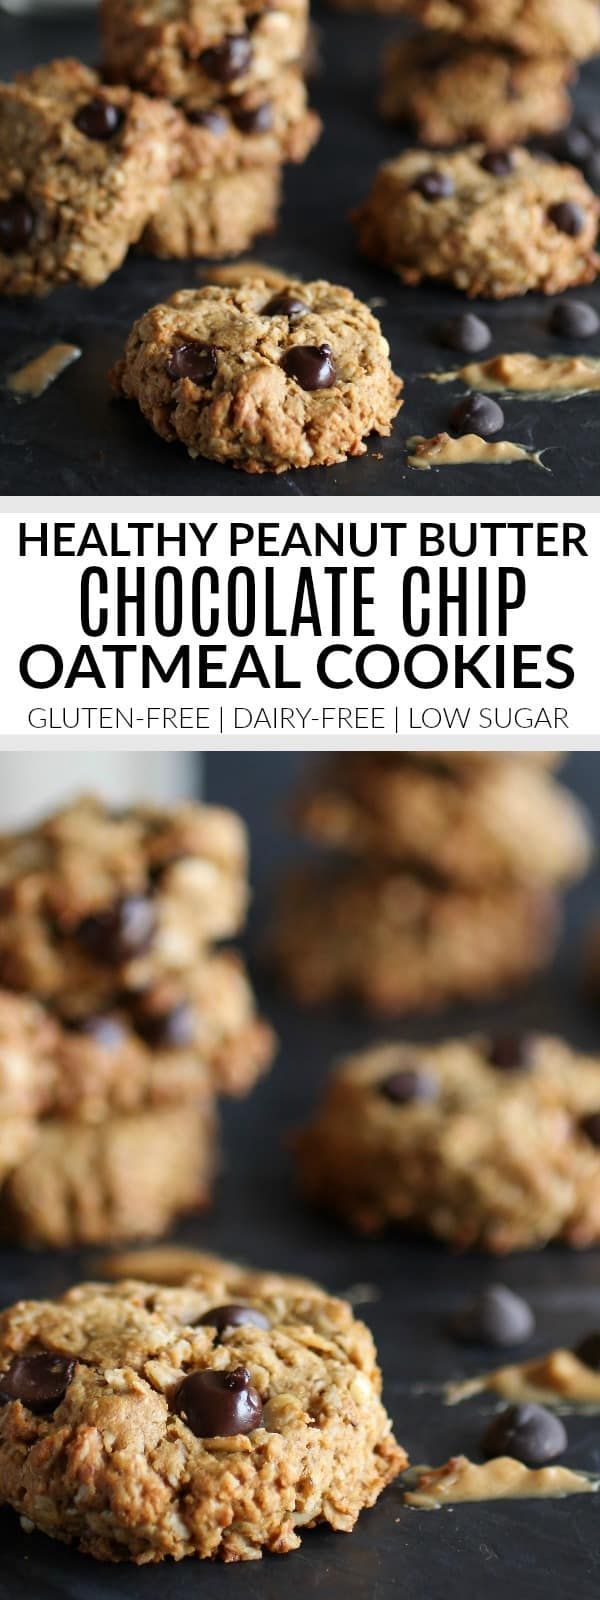 Healthy Peanut Butter Chocolate Chip Oatmeal Cookies -   13 healthy recipes Gluten Free chocolate chip cookies ideas